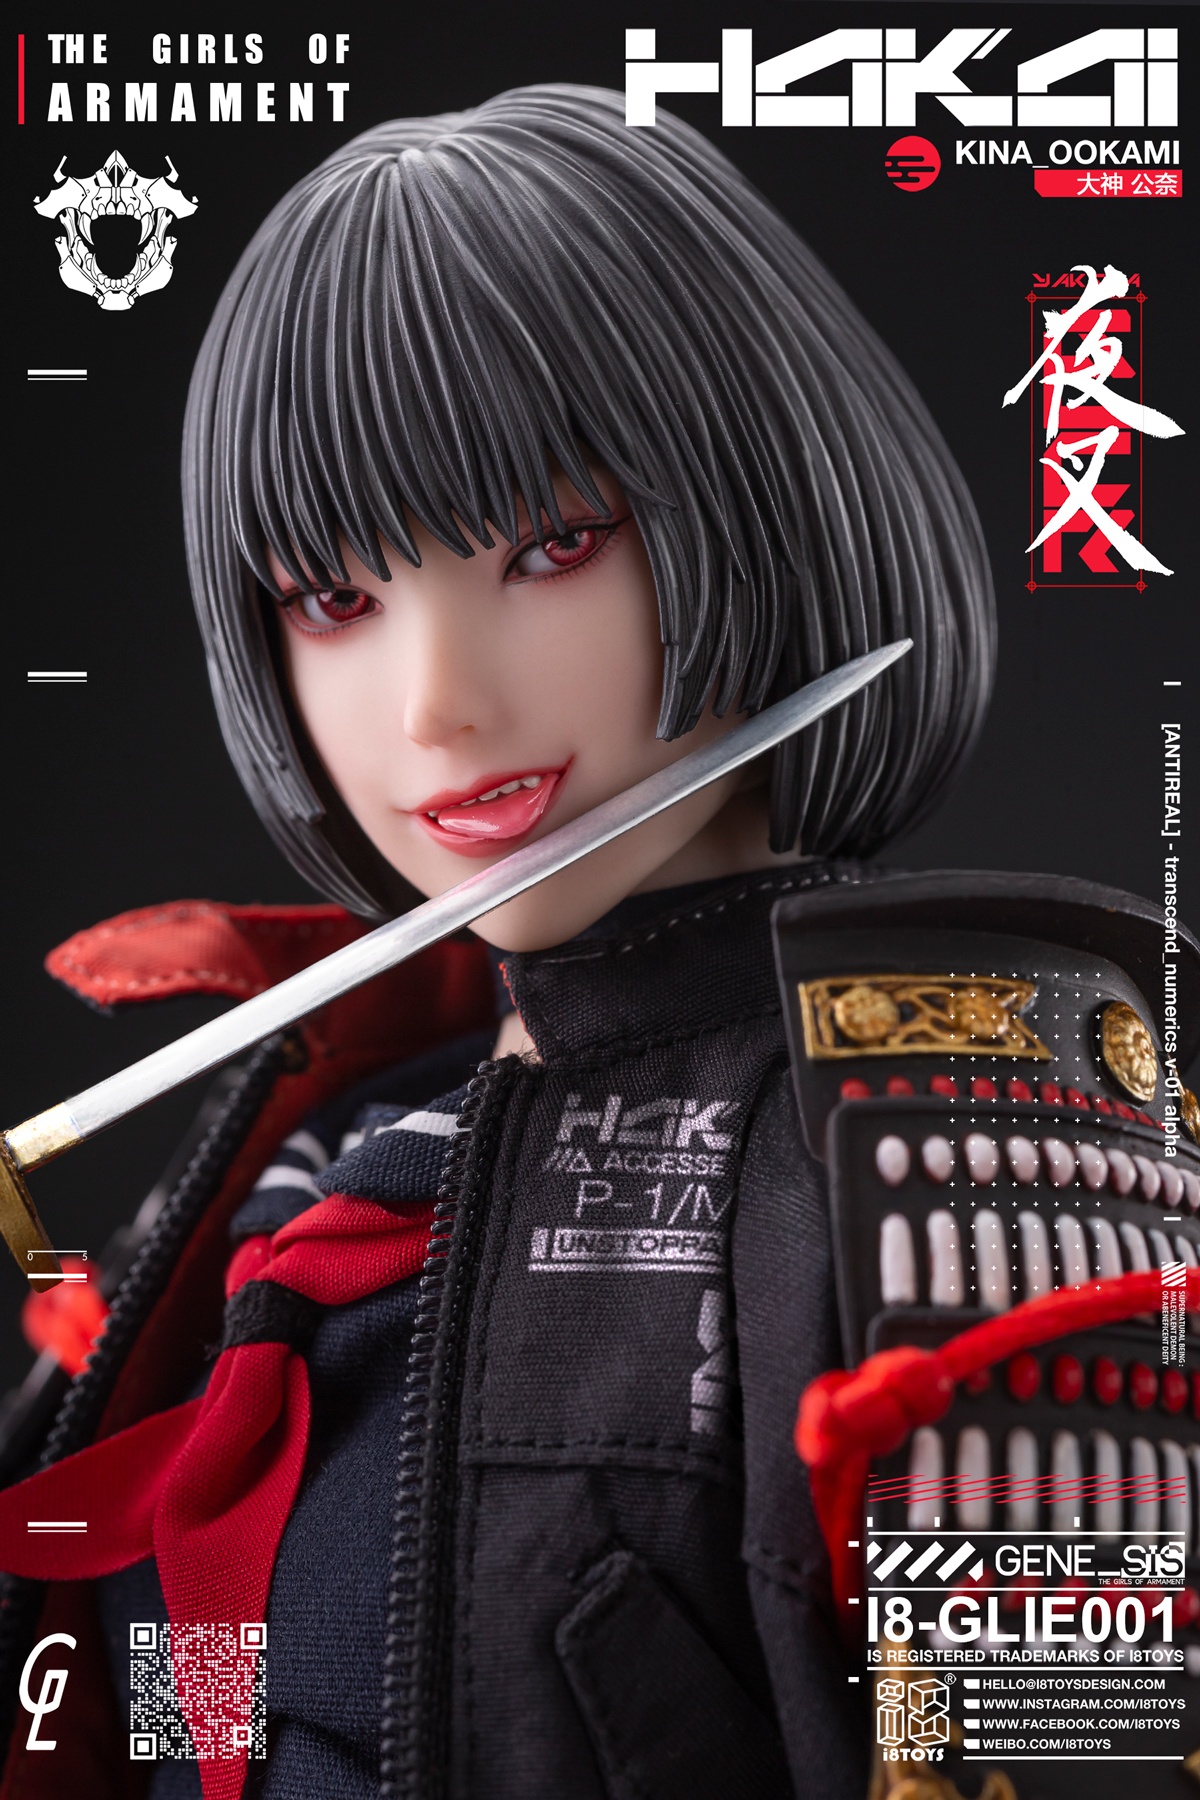 MovableEyes - NEW PRODUCT: i8toys x Gharliera: The Girls of Armament first episode "Yaksha" 0835